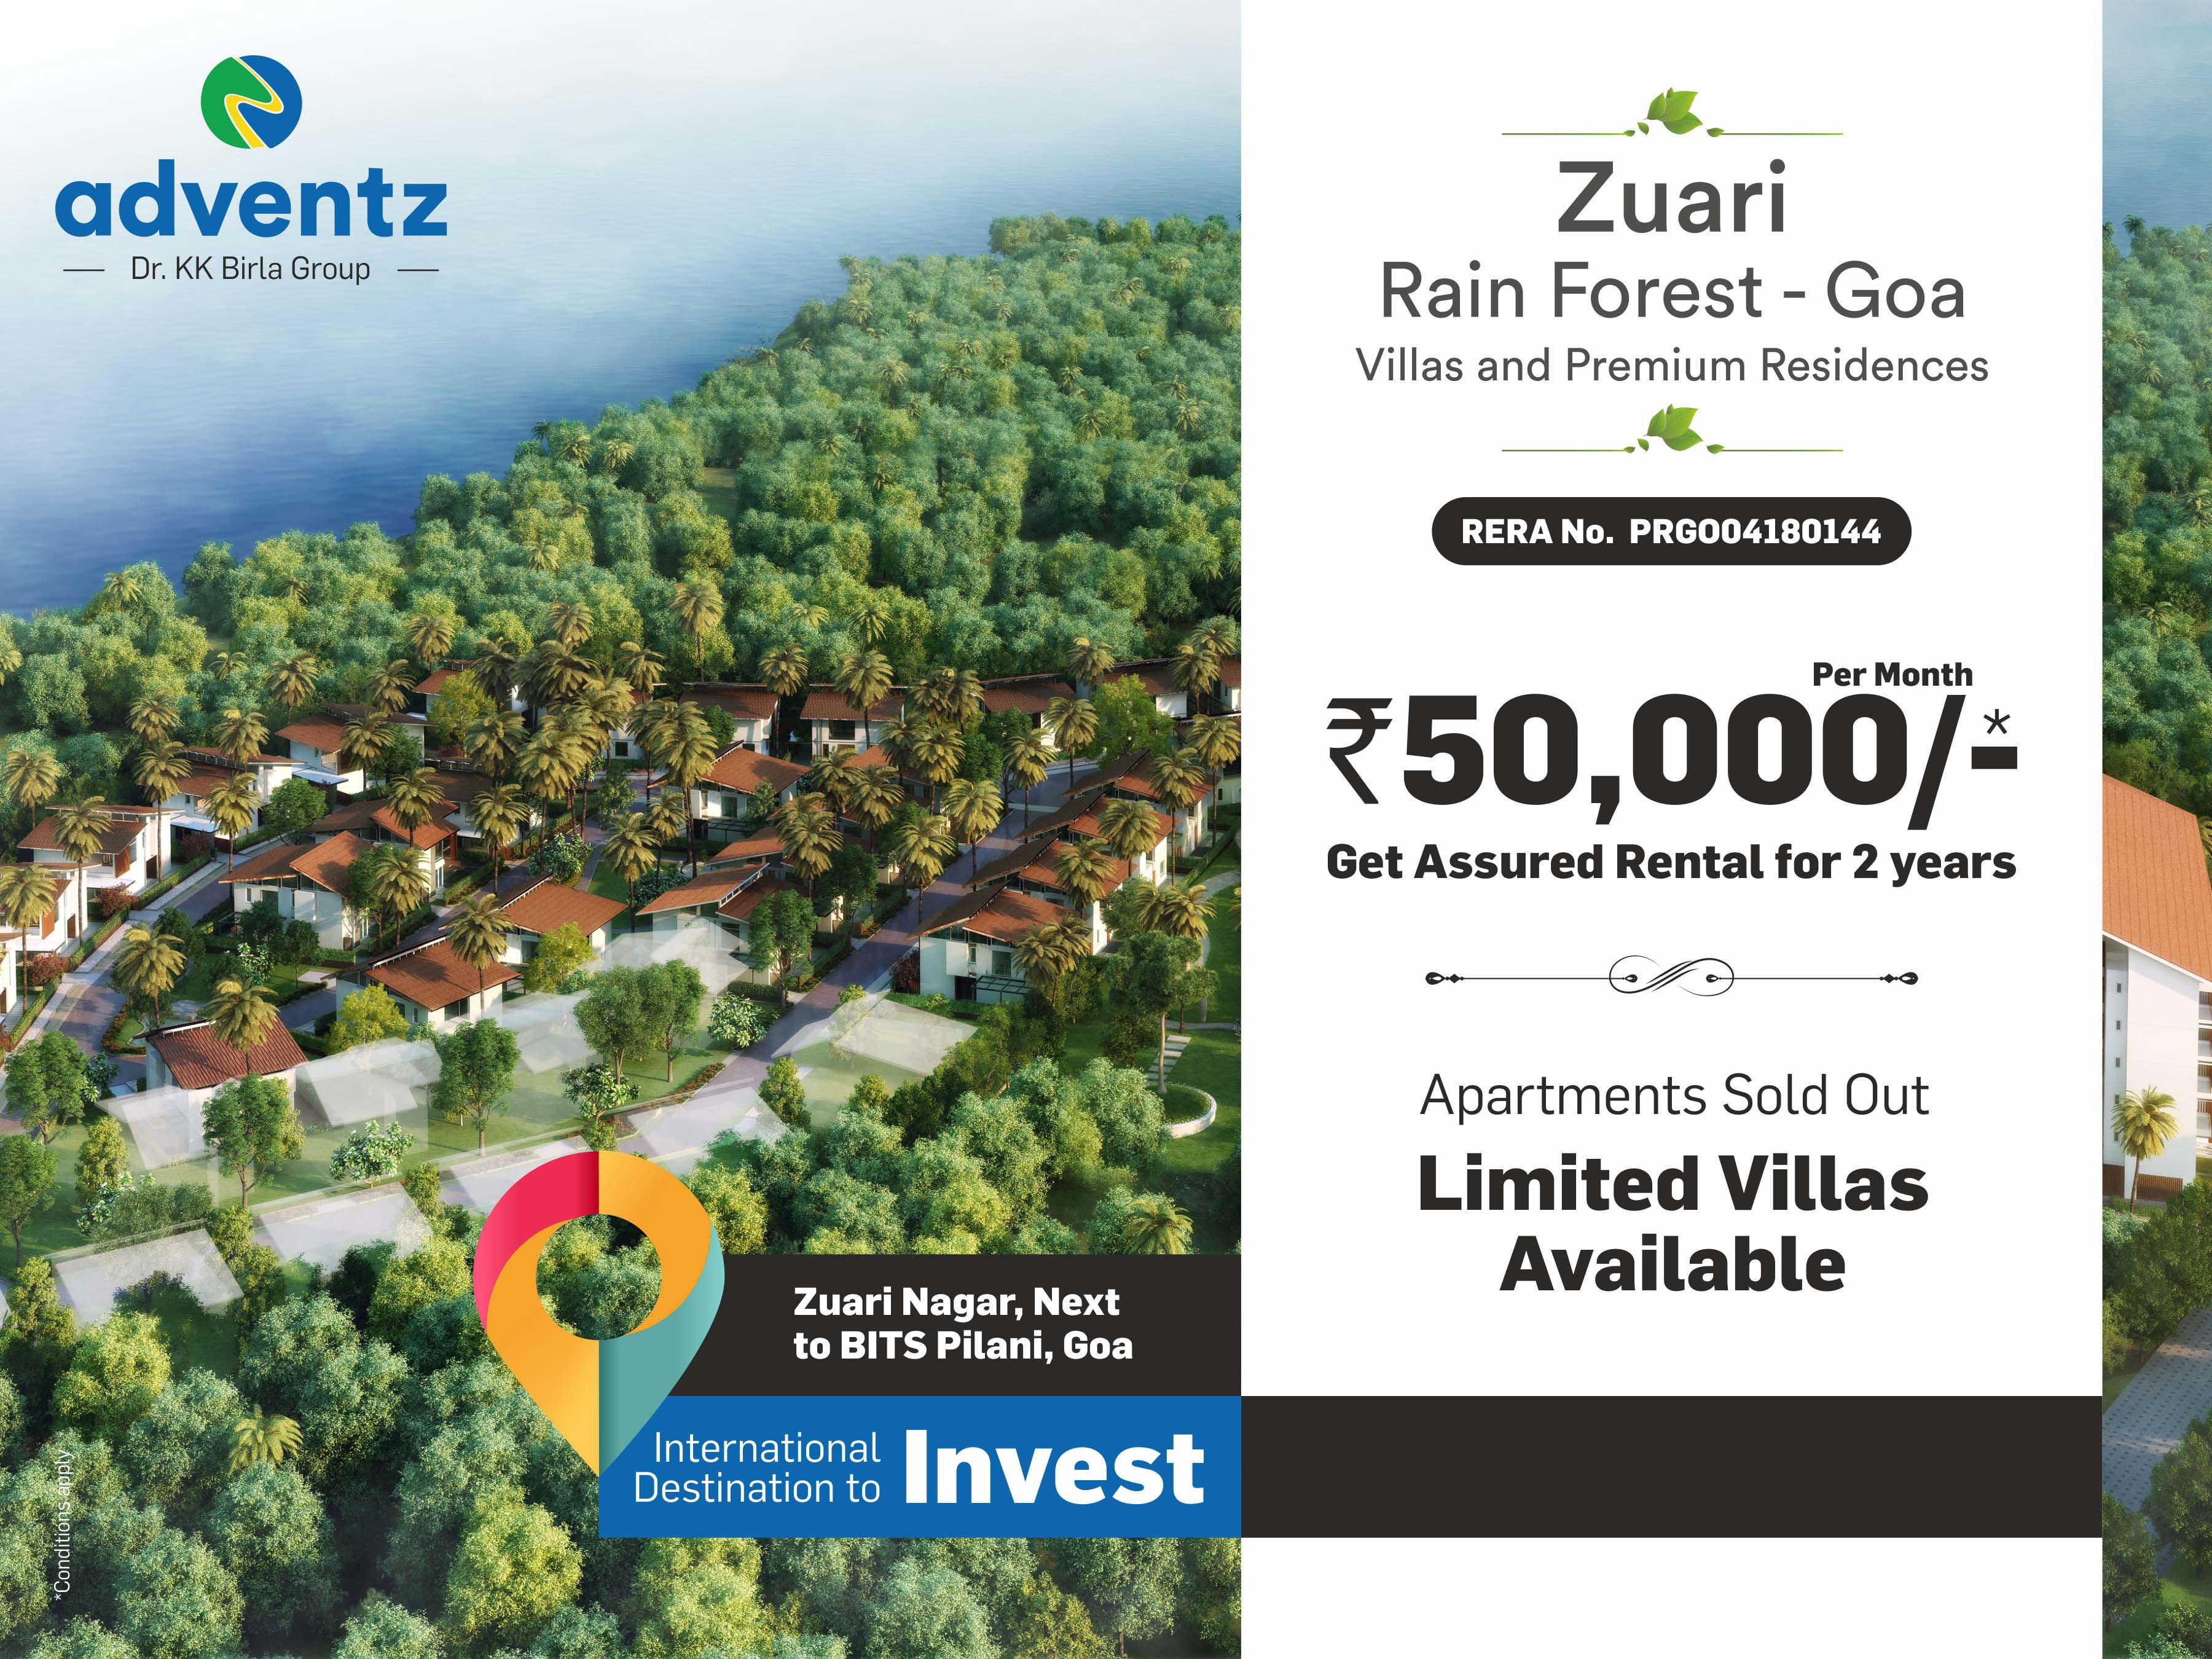 Get assured rental of Rs. 50,000 for 2 years at Zuari Rain Forest in Goa Update